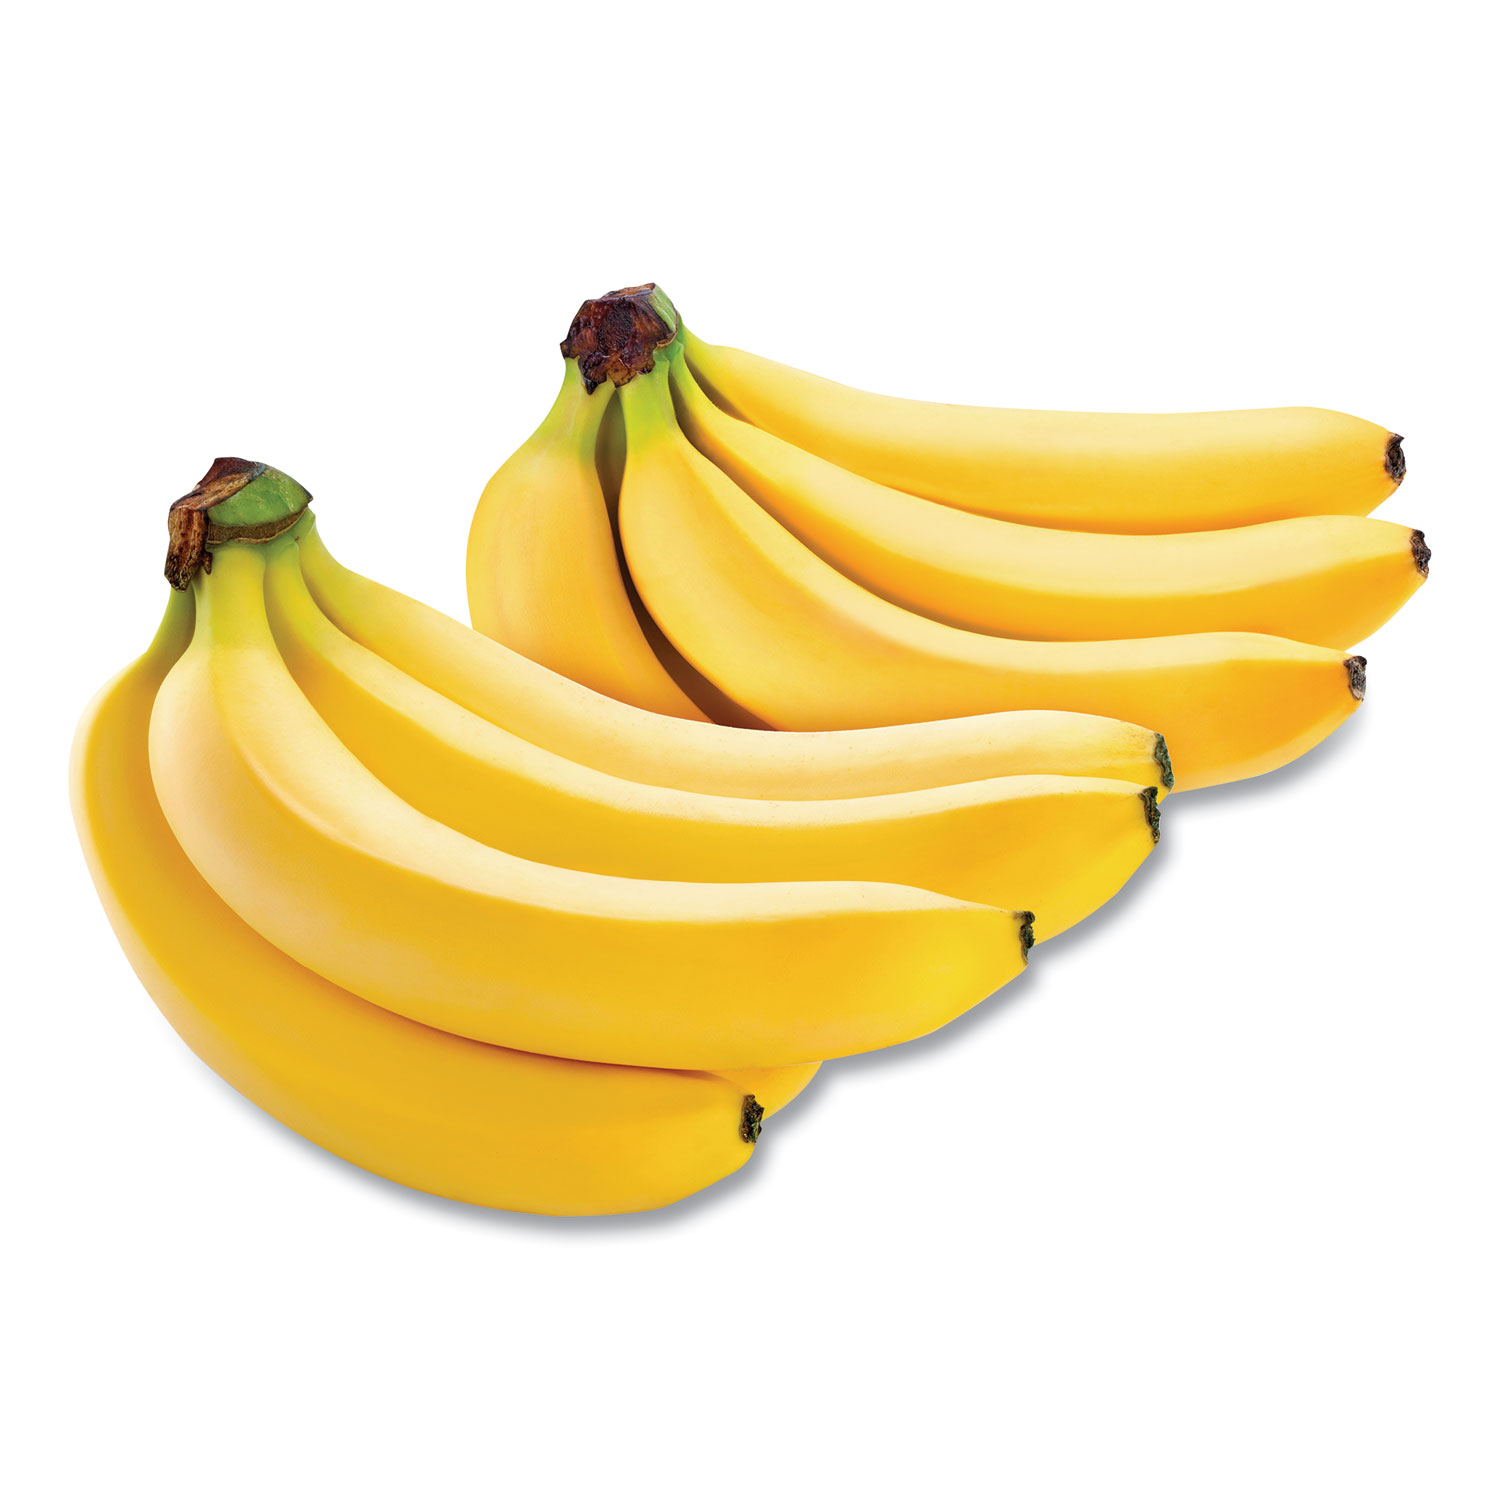 National Brand Fresh Organic Bananas, 6 lbs, 2 Bundles/Pack, Free Delivery in 1-4 Business Days